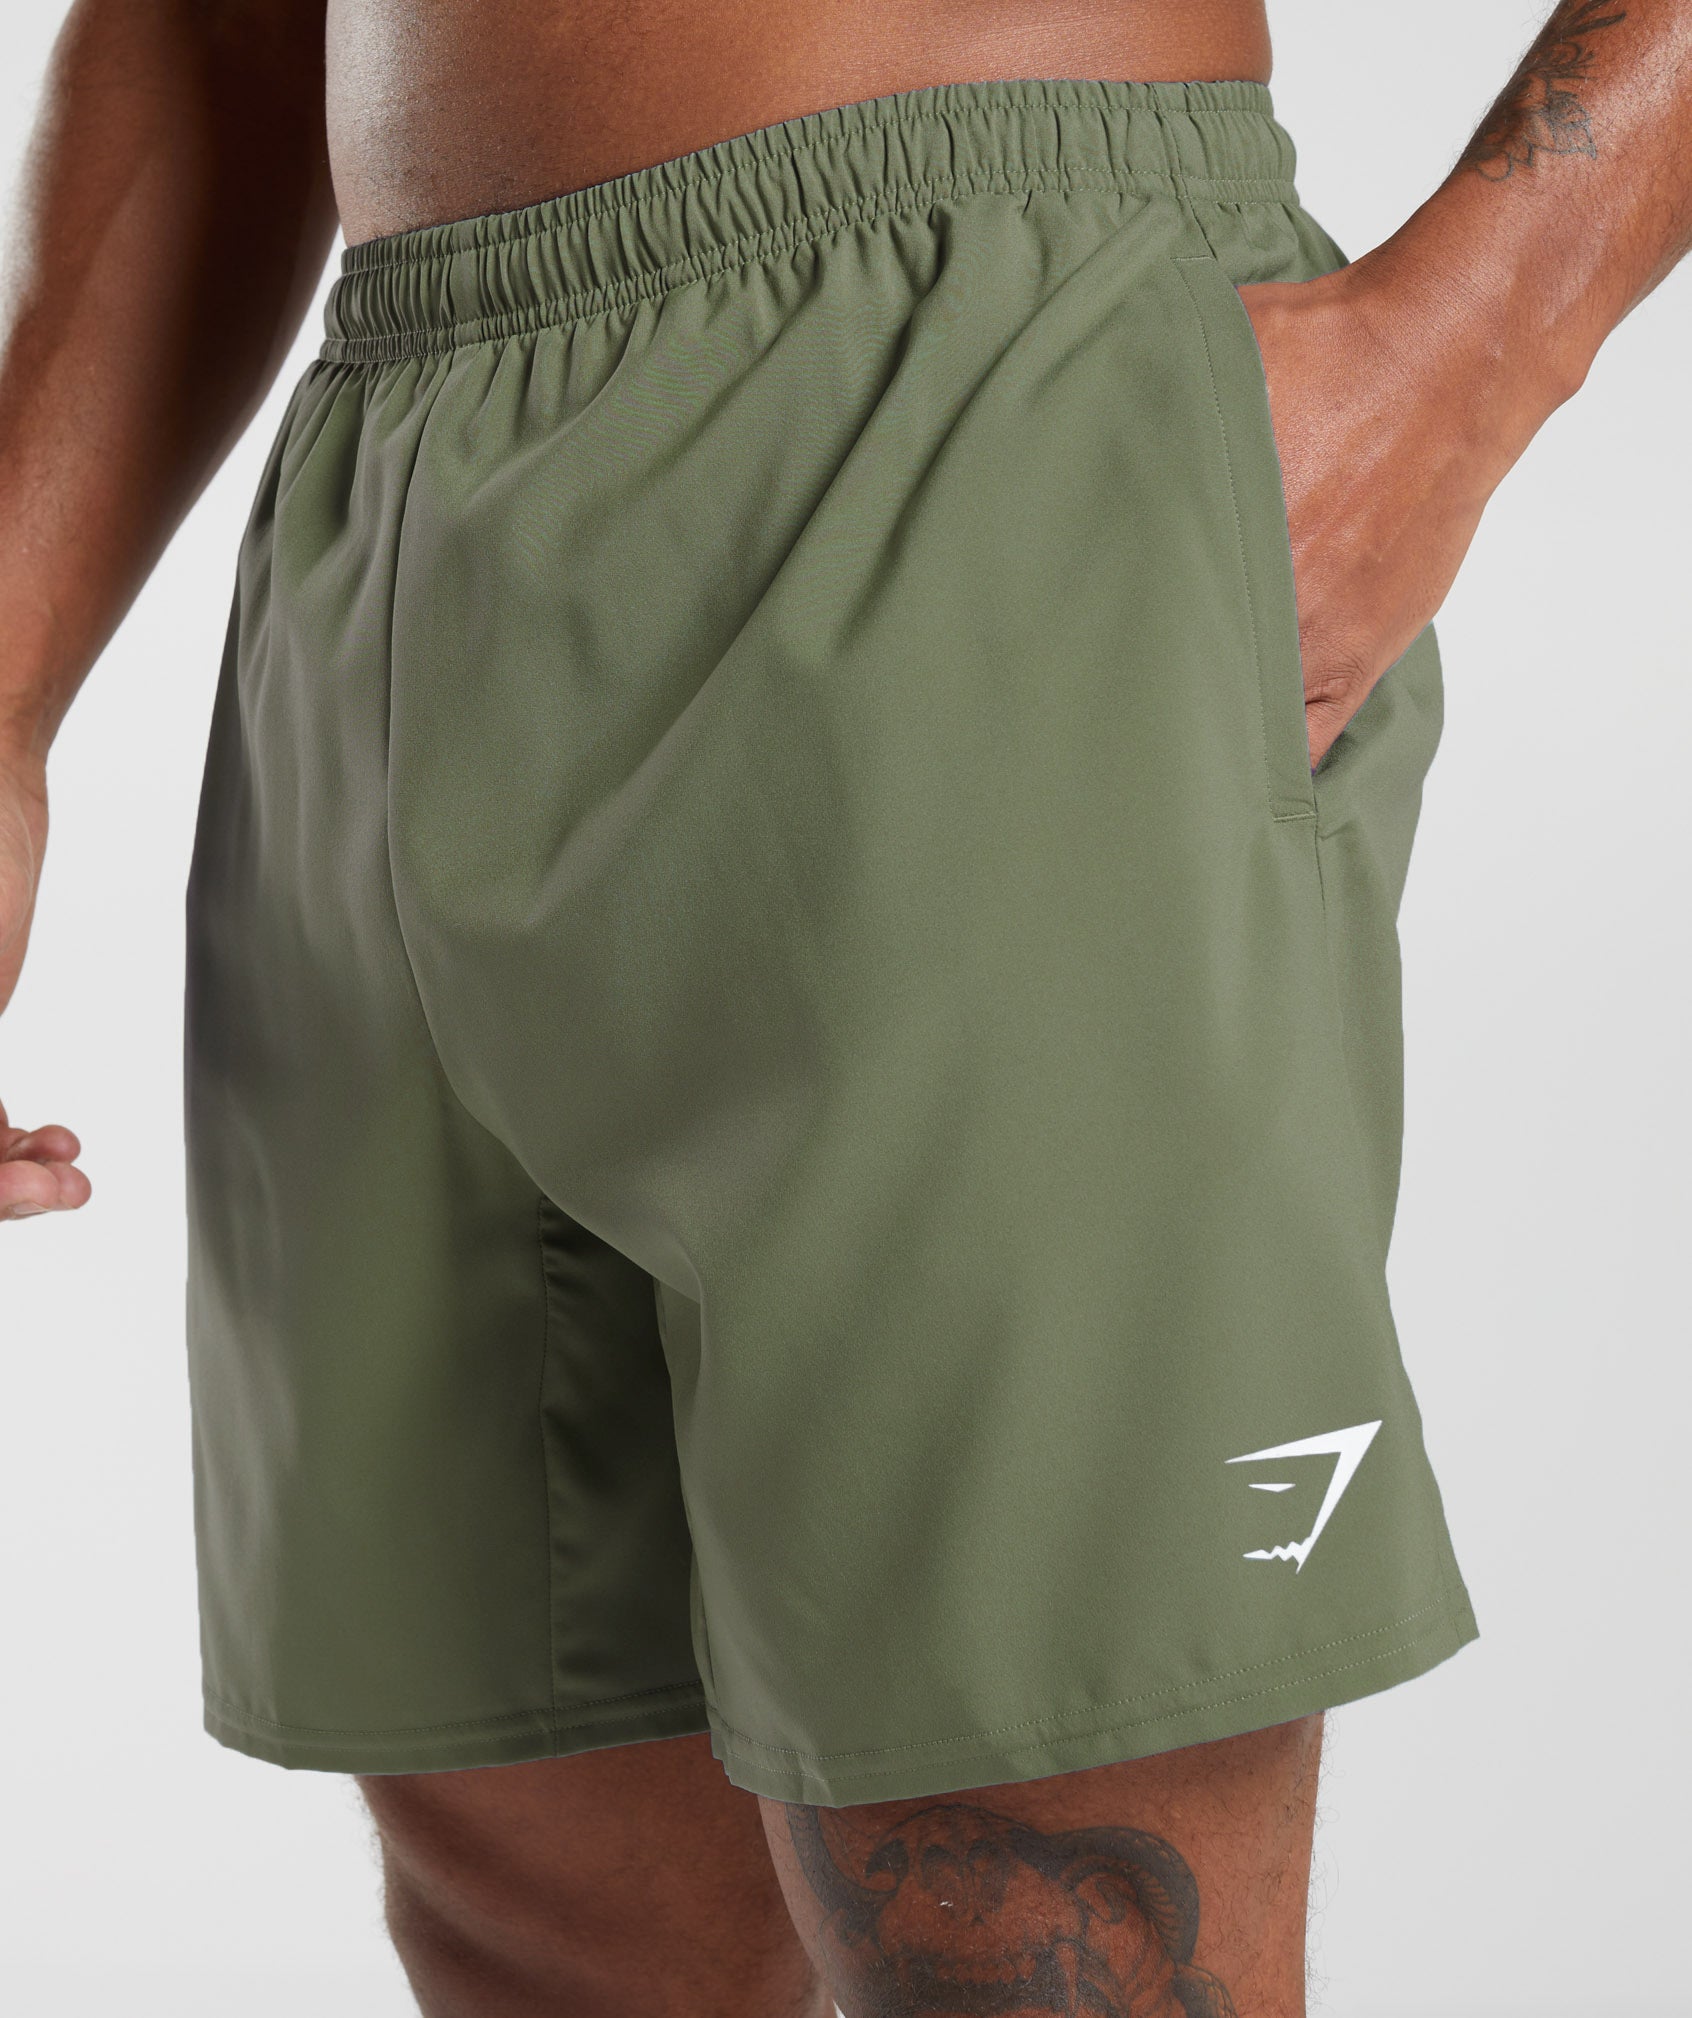 Arrival Shorts in Core Olive